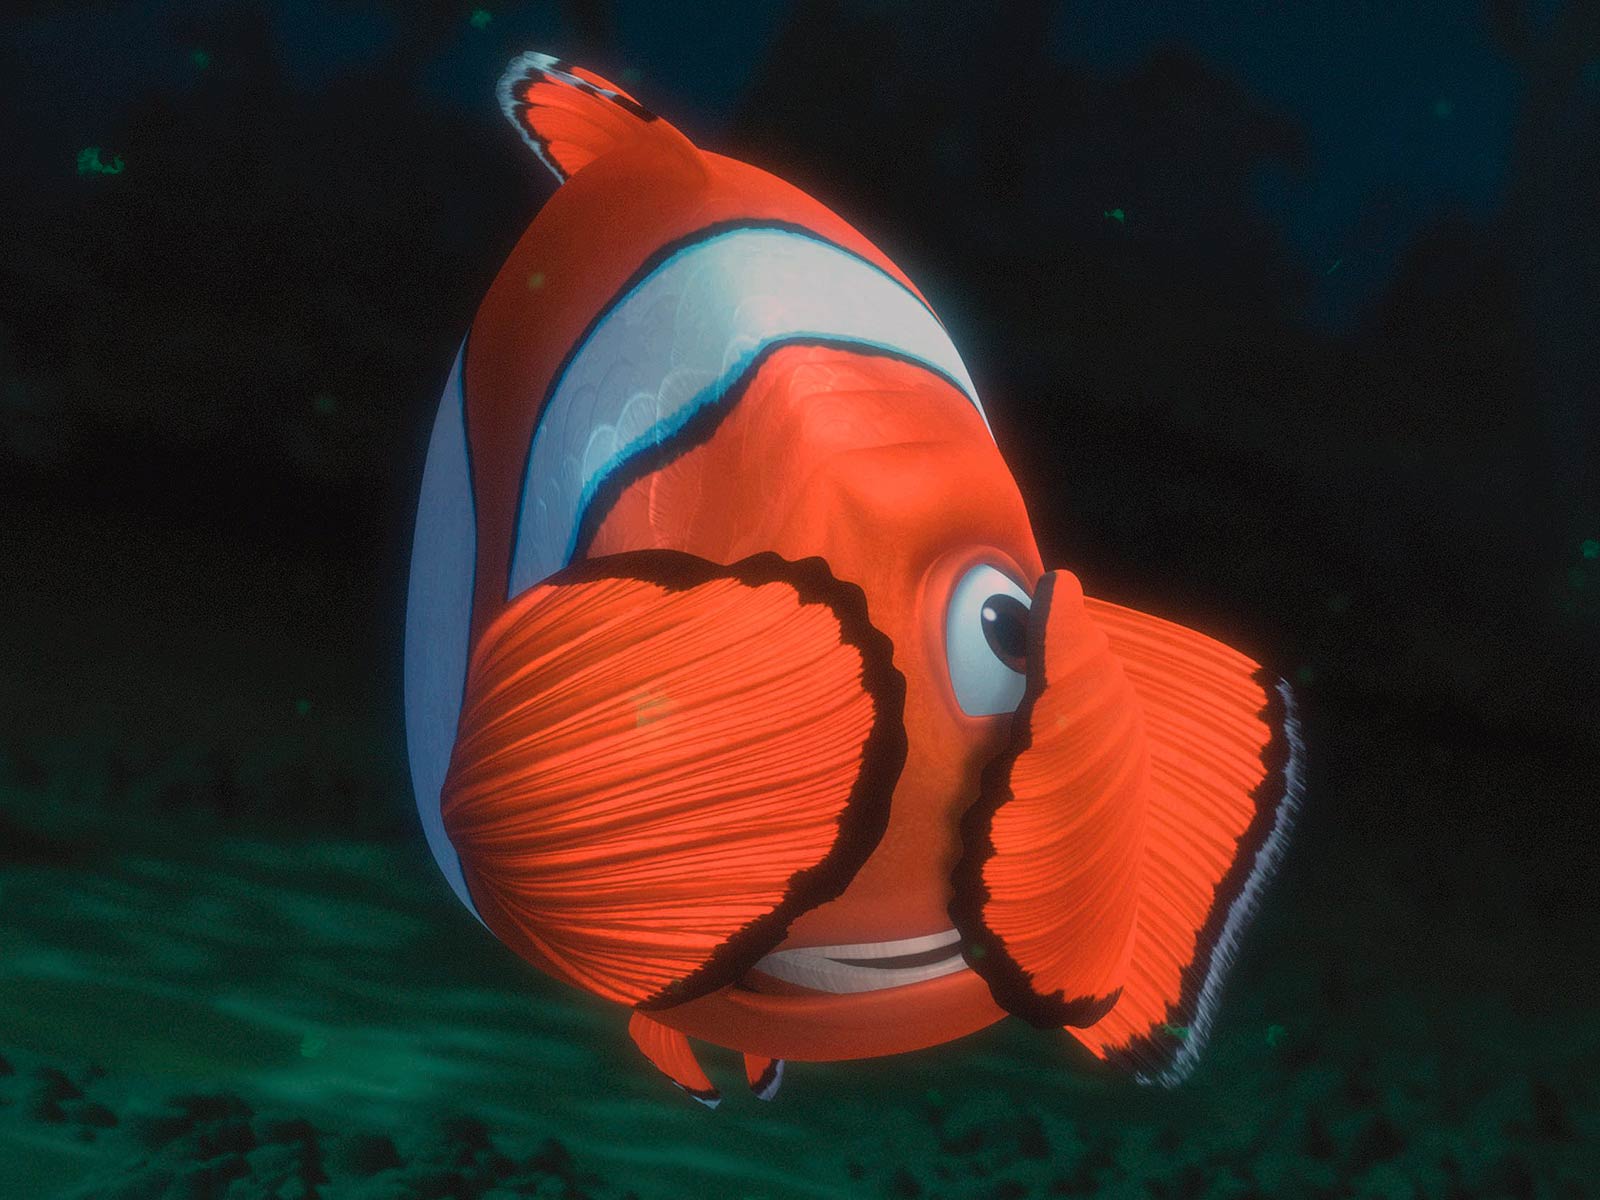 Nemo, the adorable clownfish from Finding Nemo.